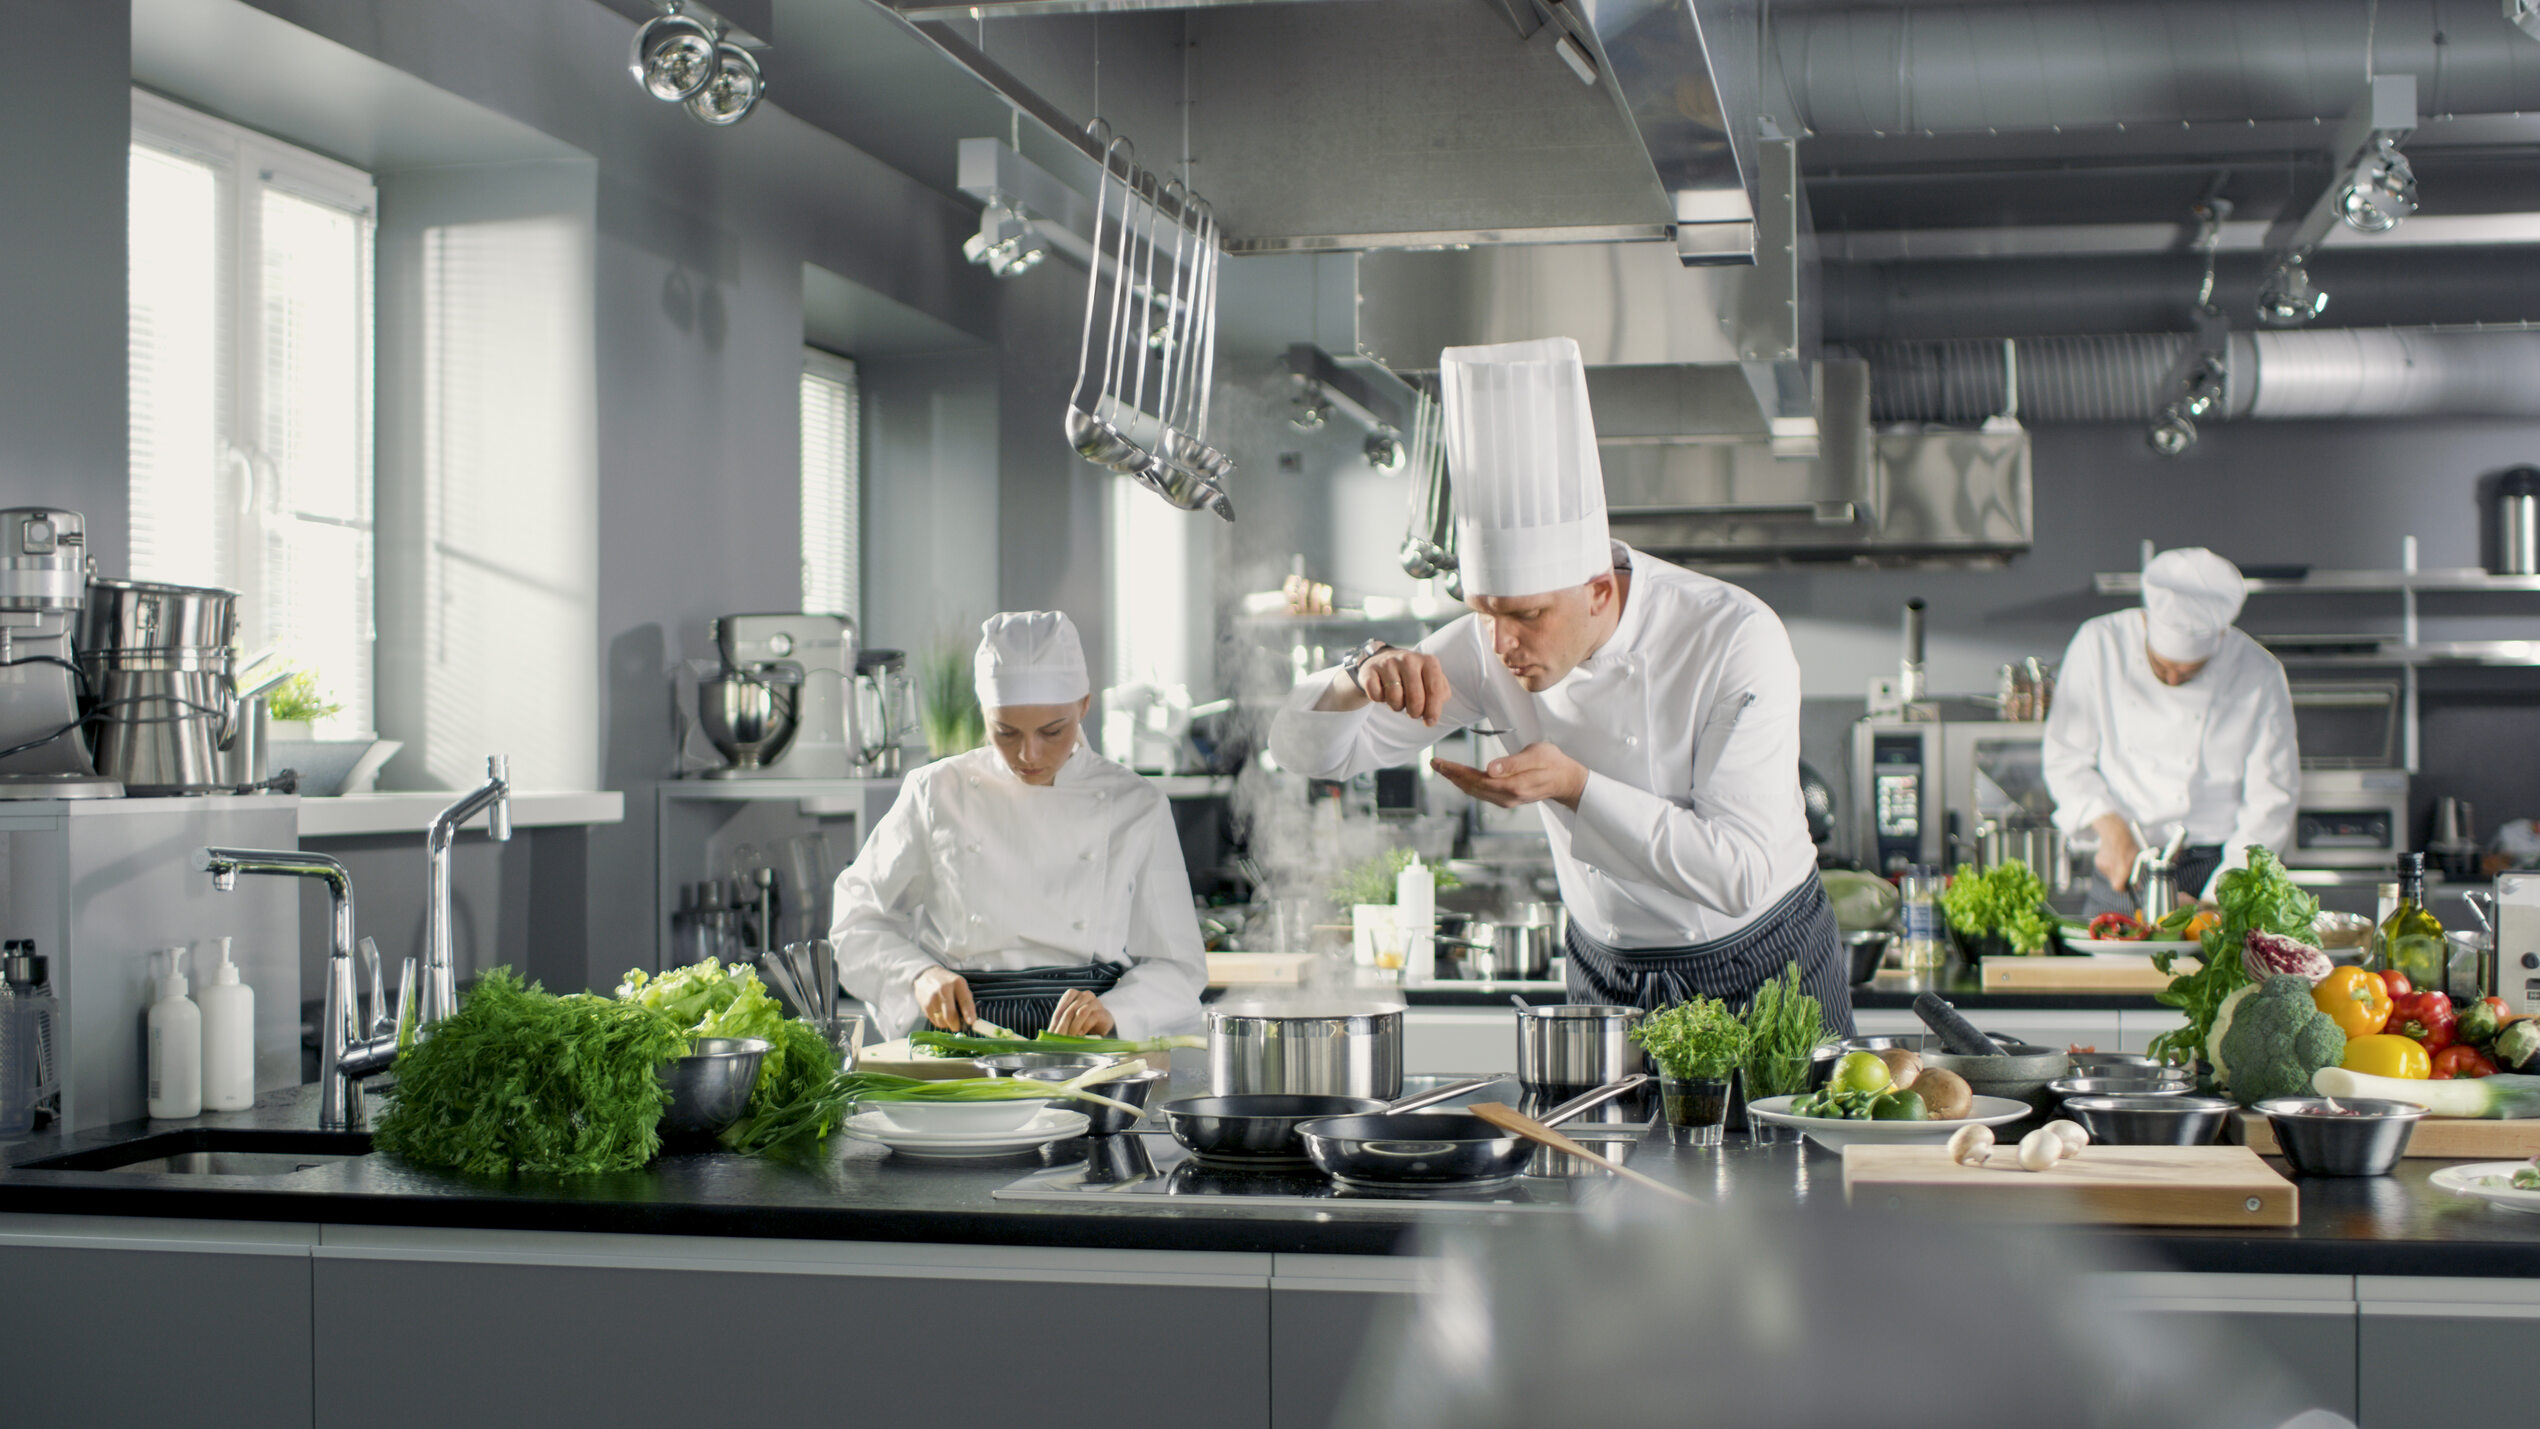 Several chefs cooking in a commercial kitchen